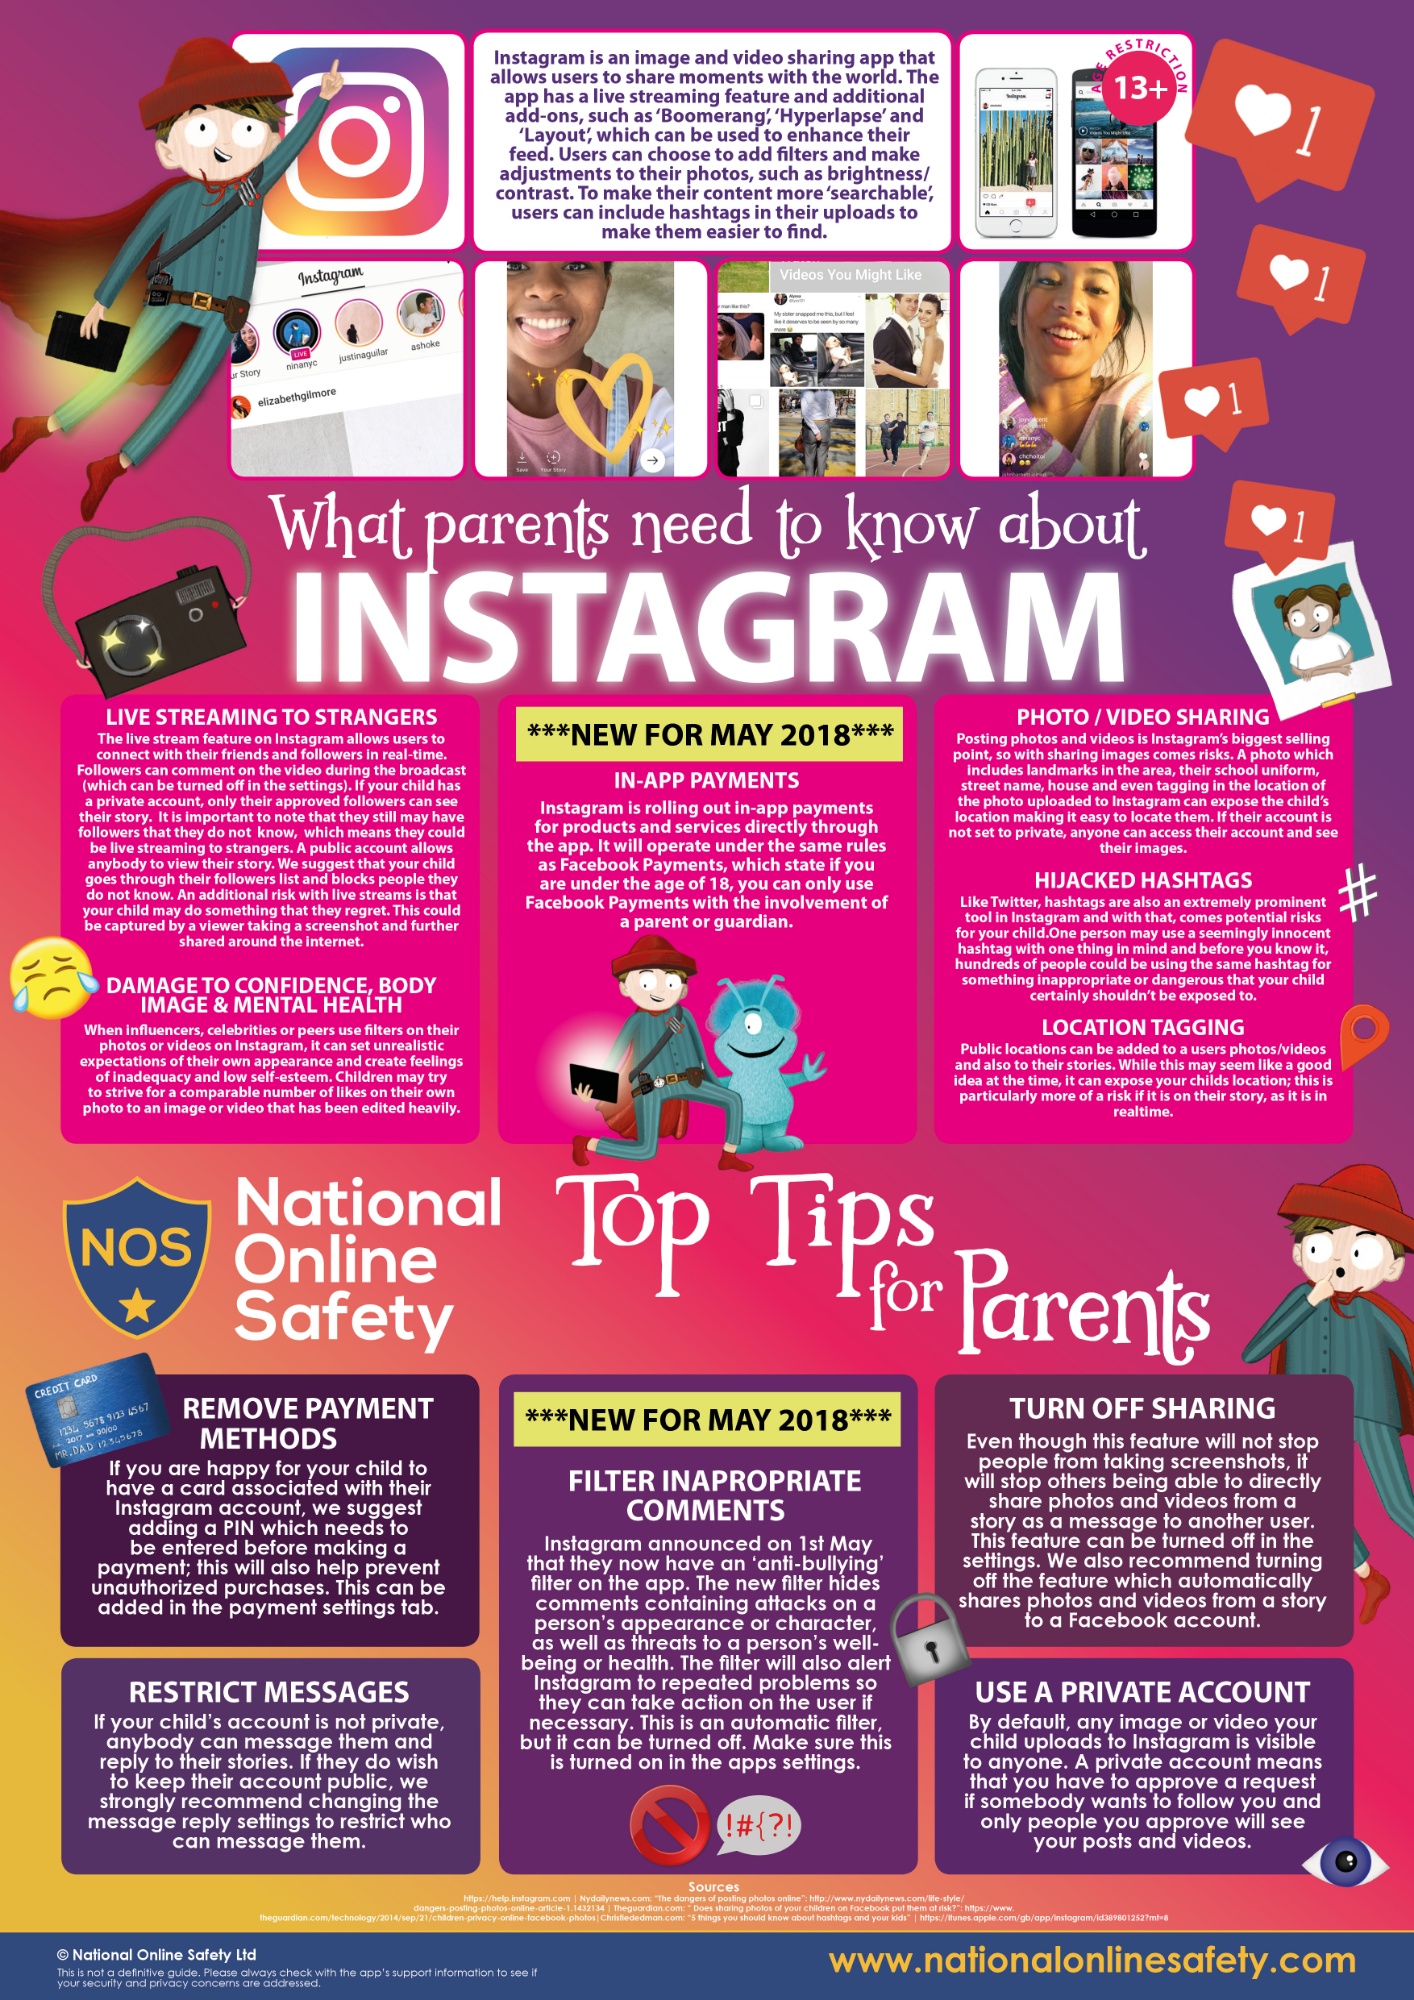 Internet Safety Guide for parents. Top Tips against bullying. TV and Health problems TV and the parents guidance. Keep me exposed to the language. Allowed posting